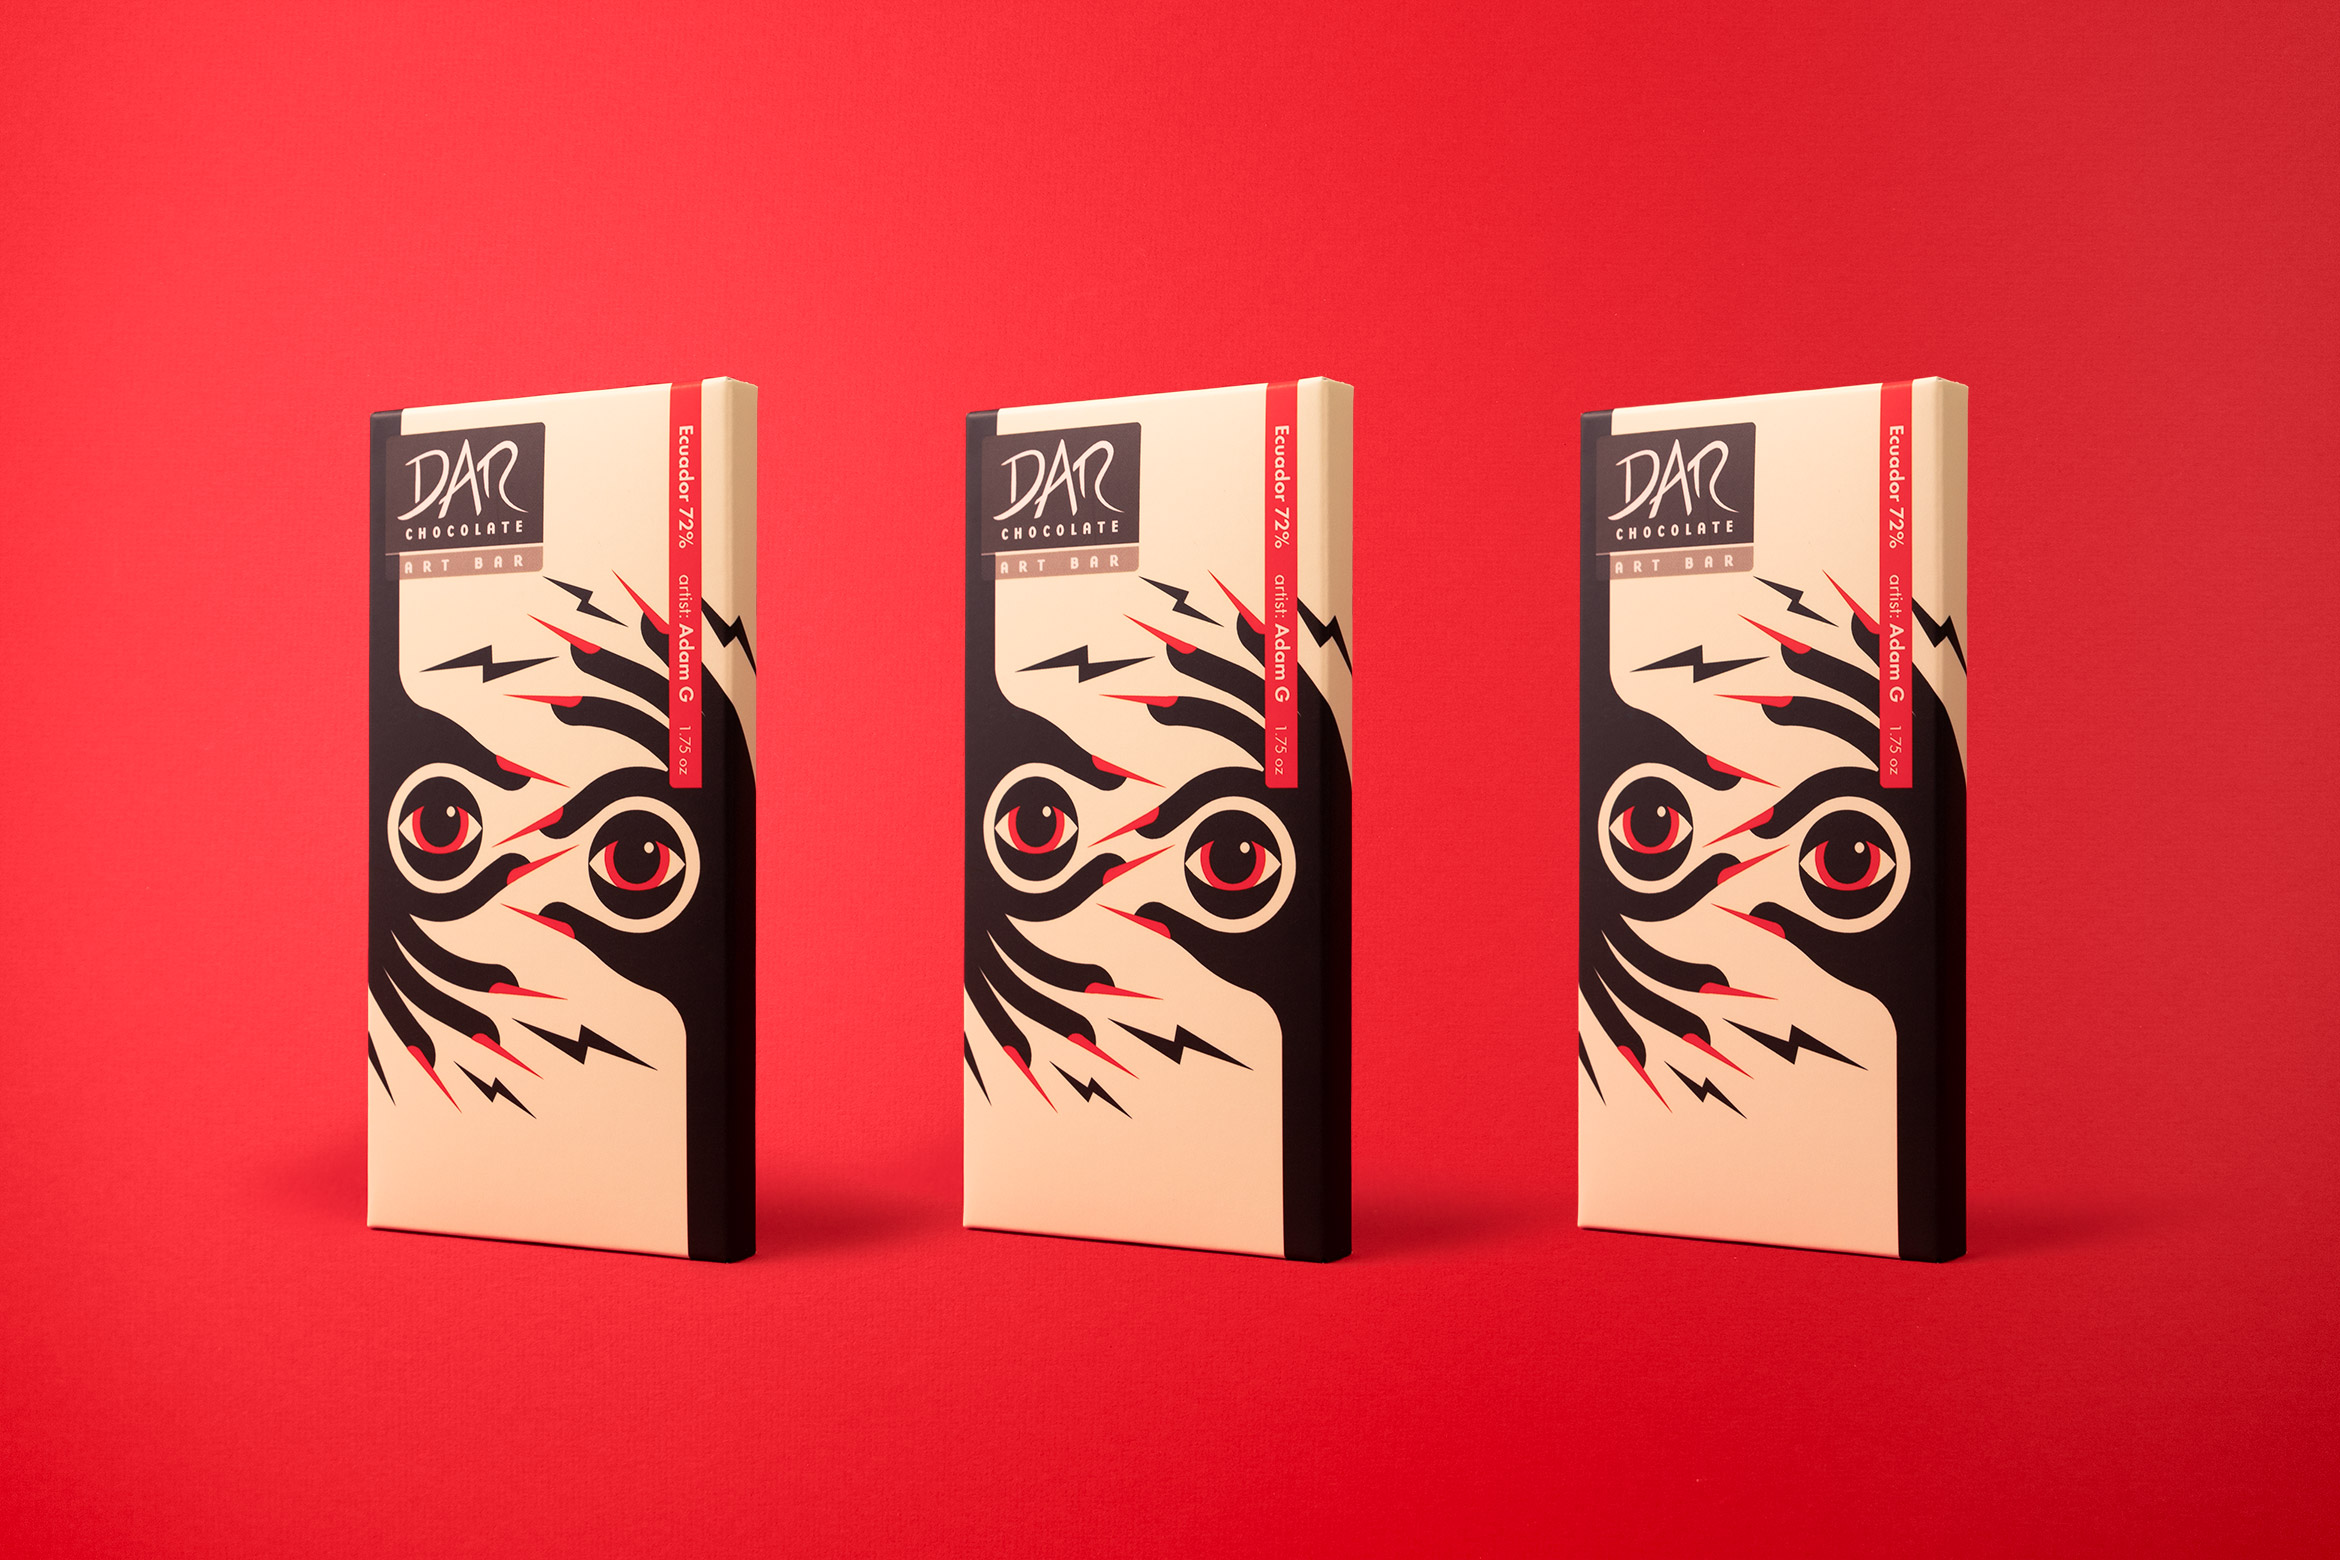 3 DAR chocolate bars with hands and eyeball design on red backdrop